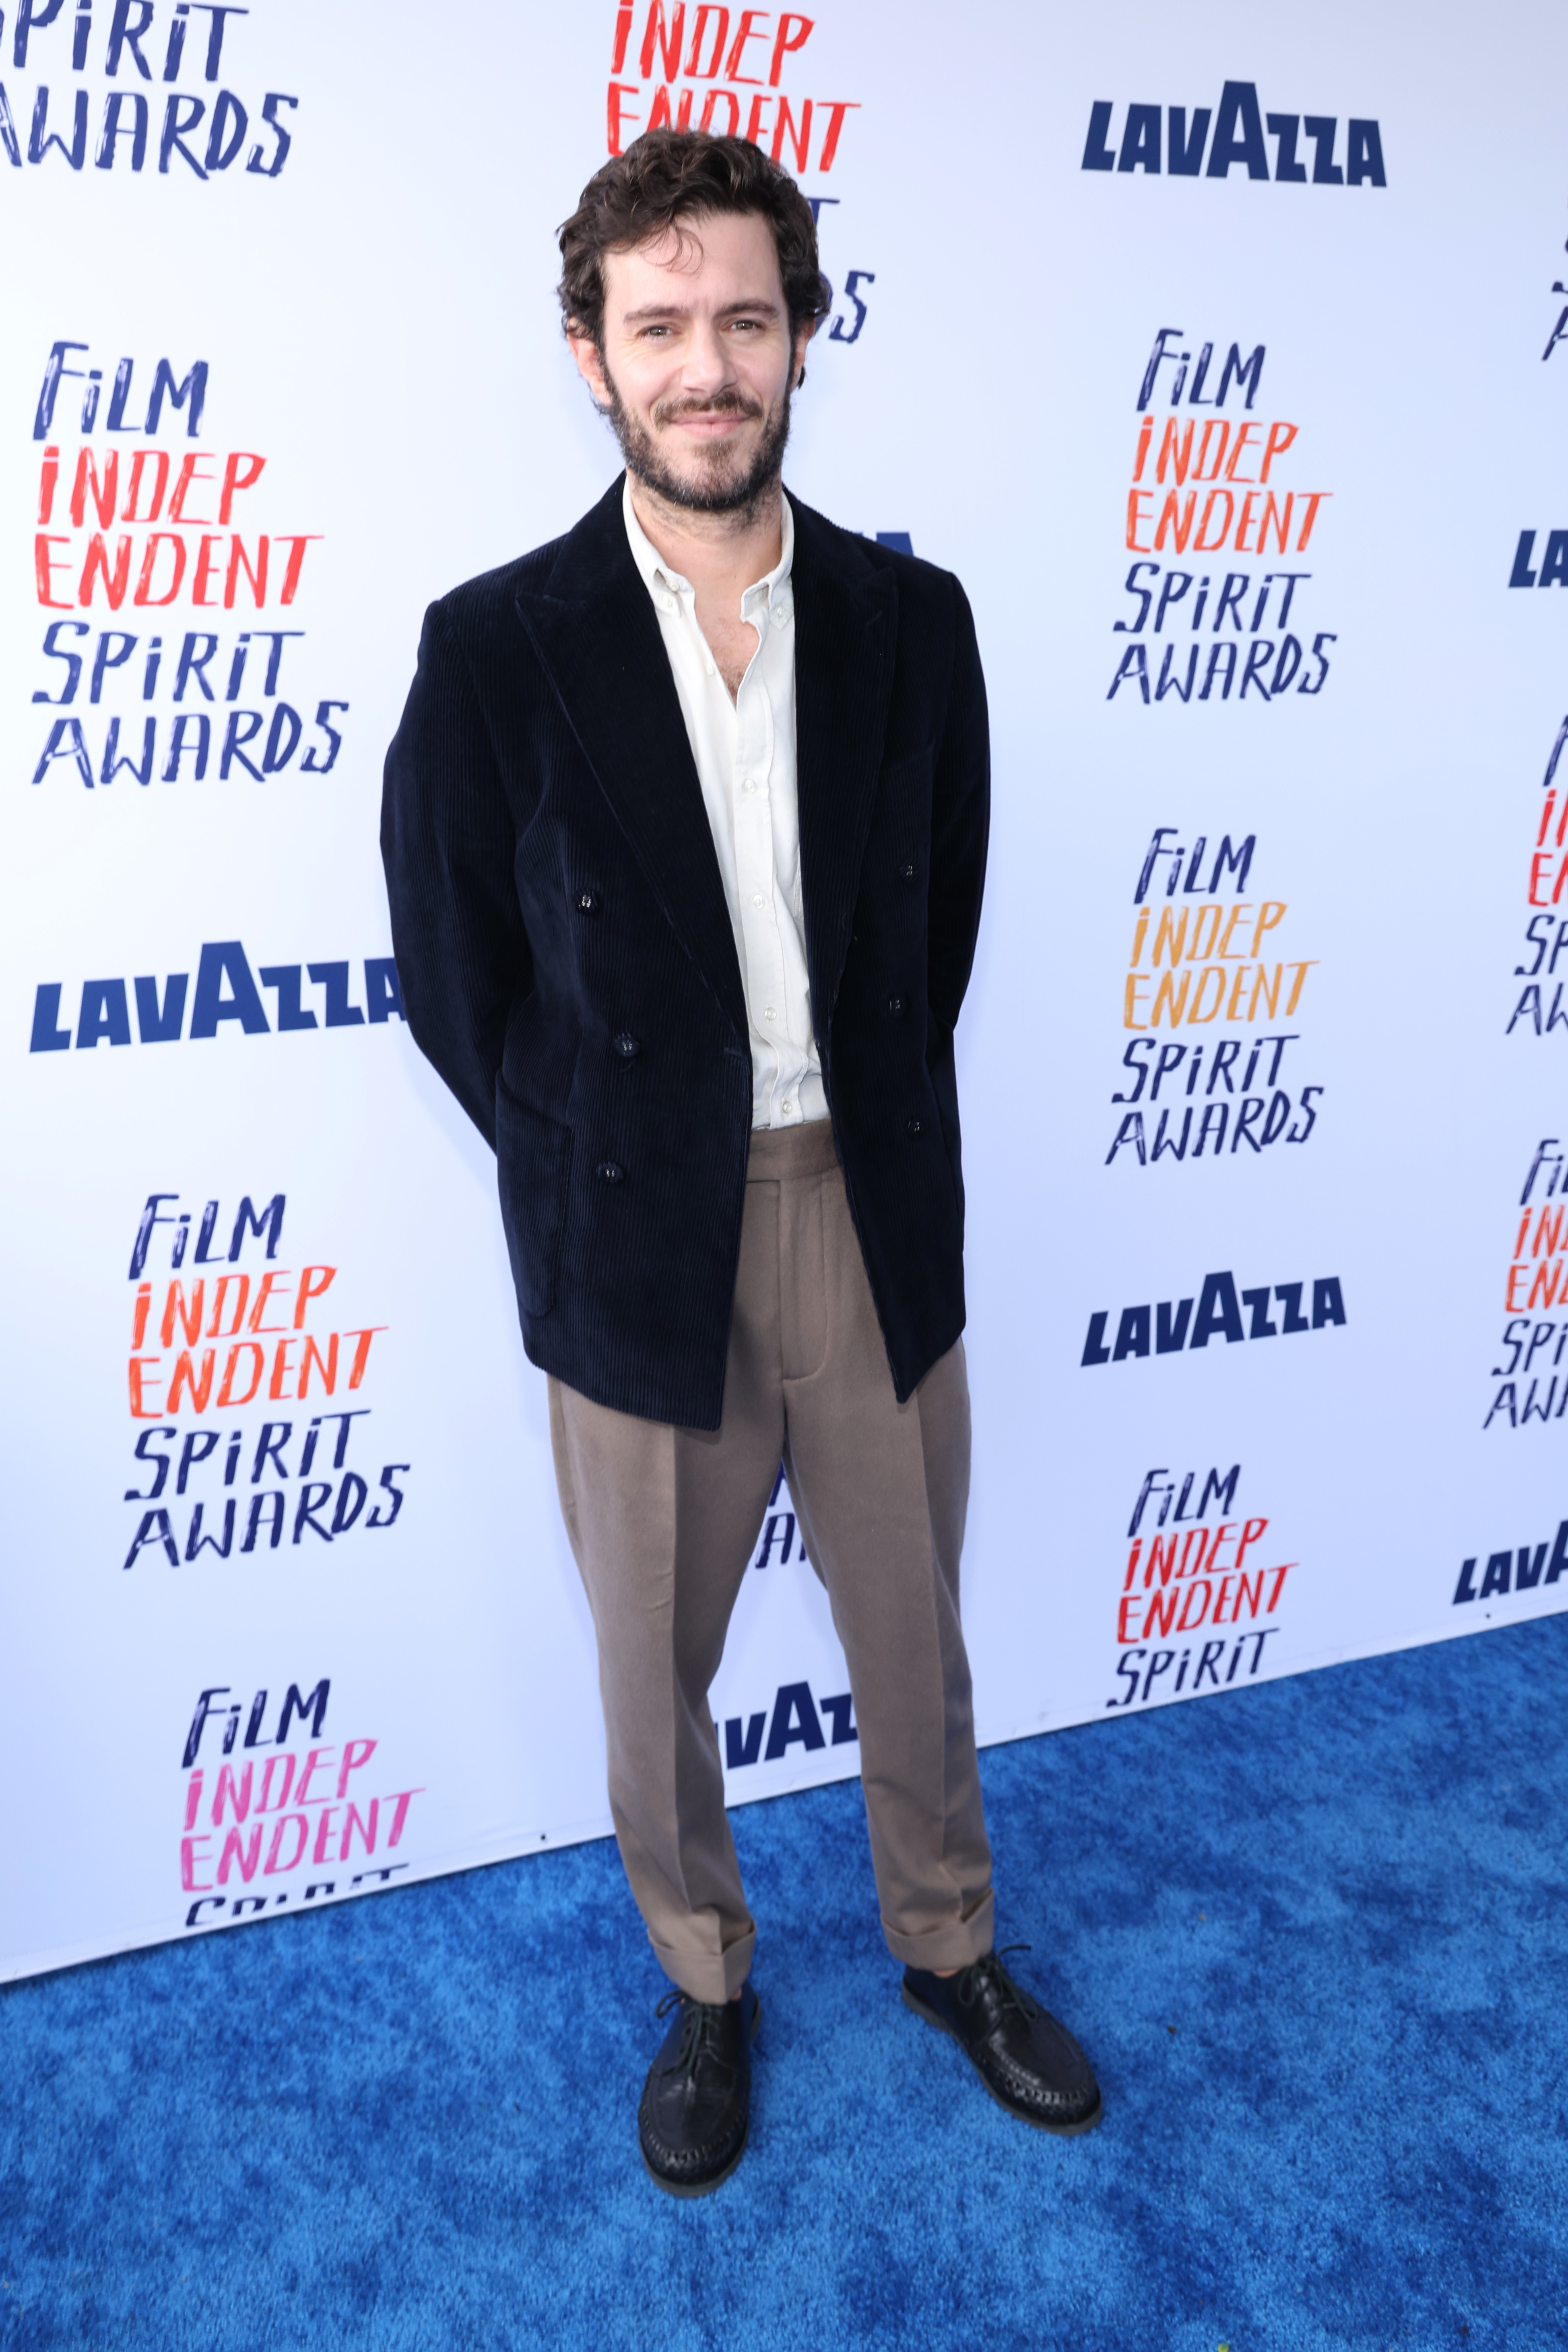 Adam in velvet jacket and trousers posing at the Film Independent Spirit Awards